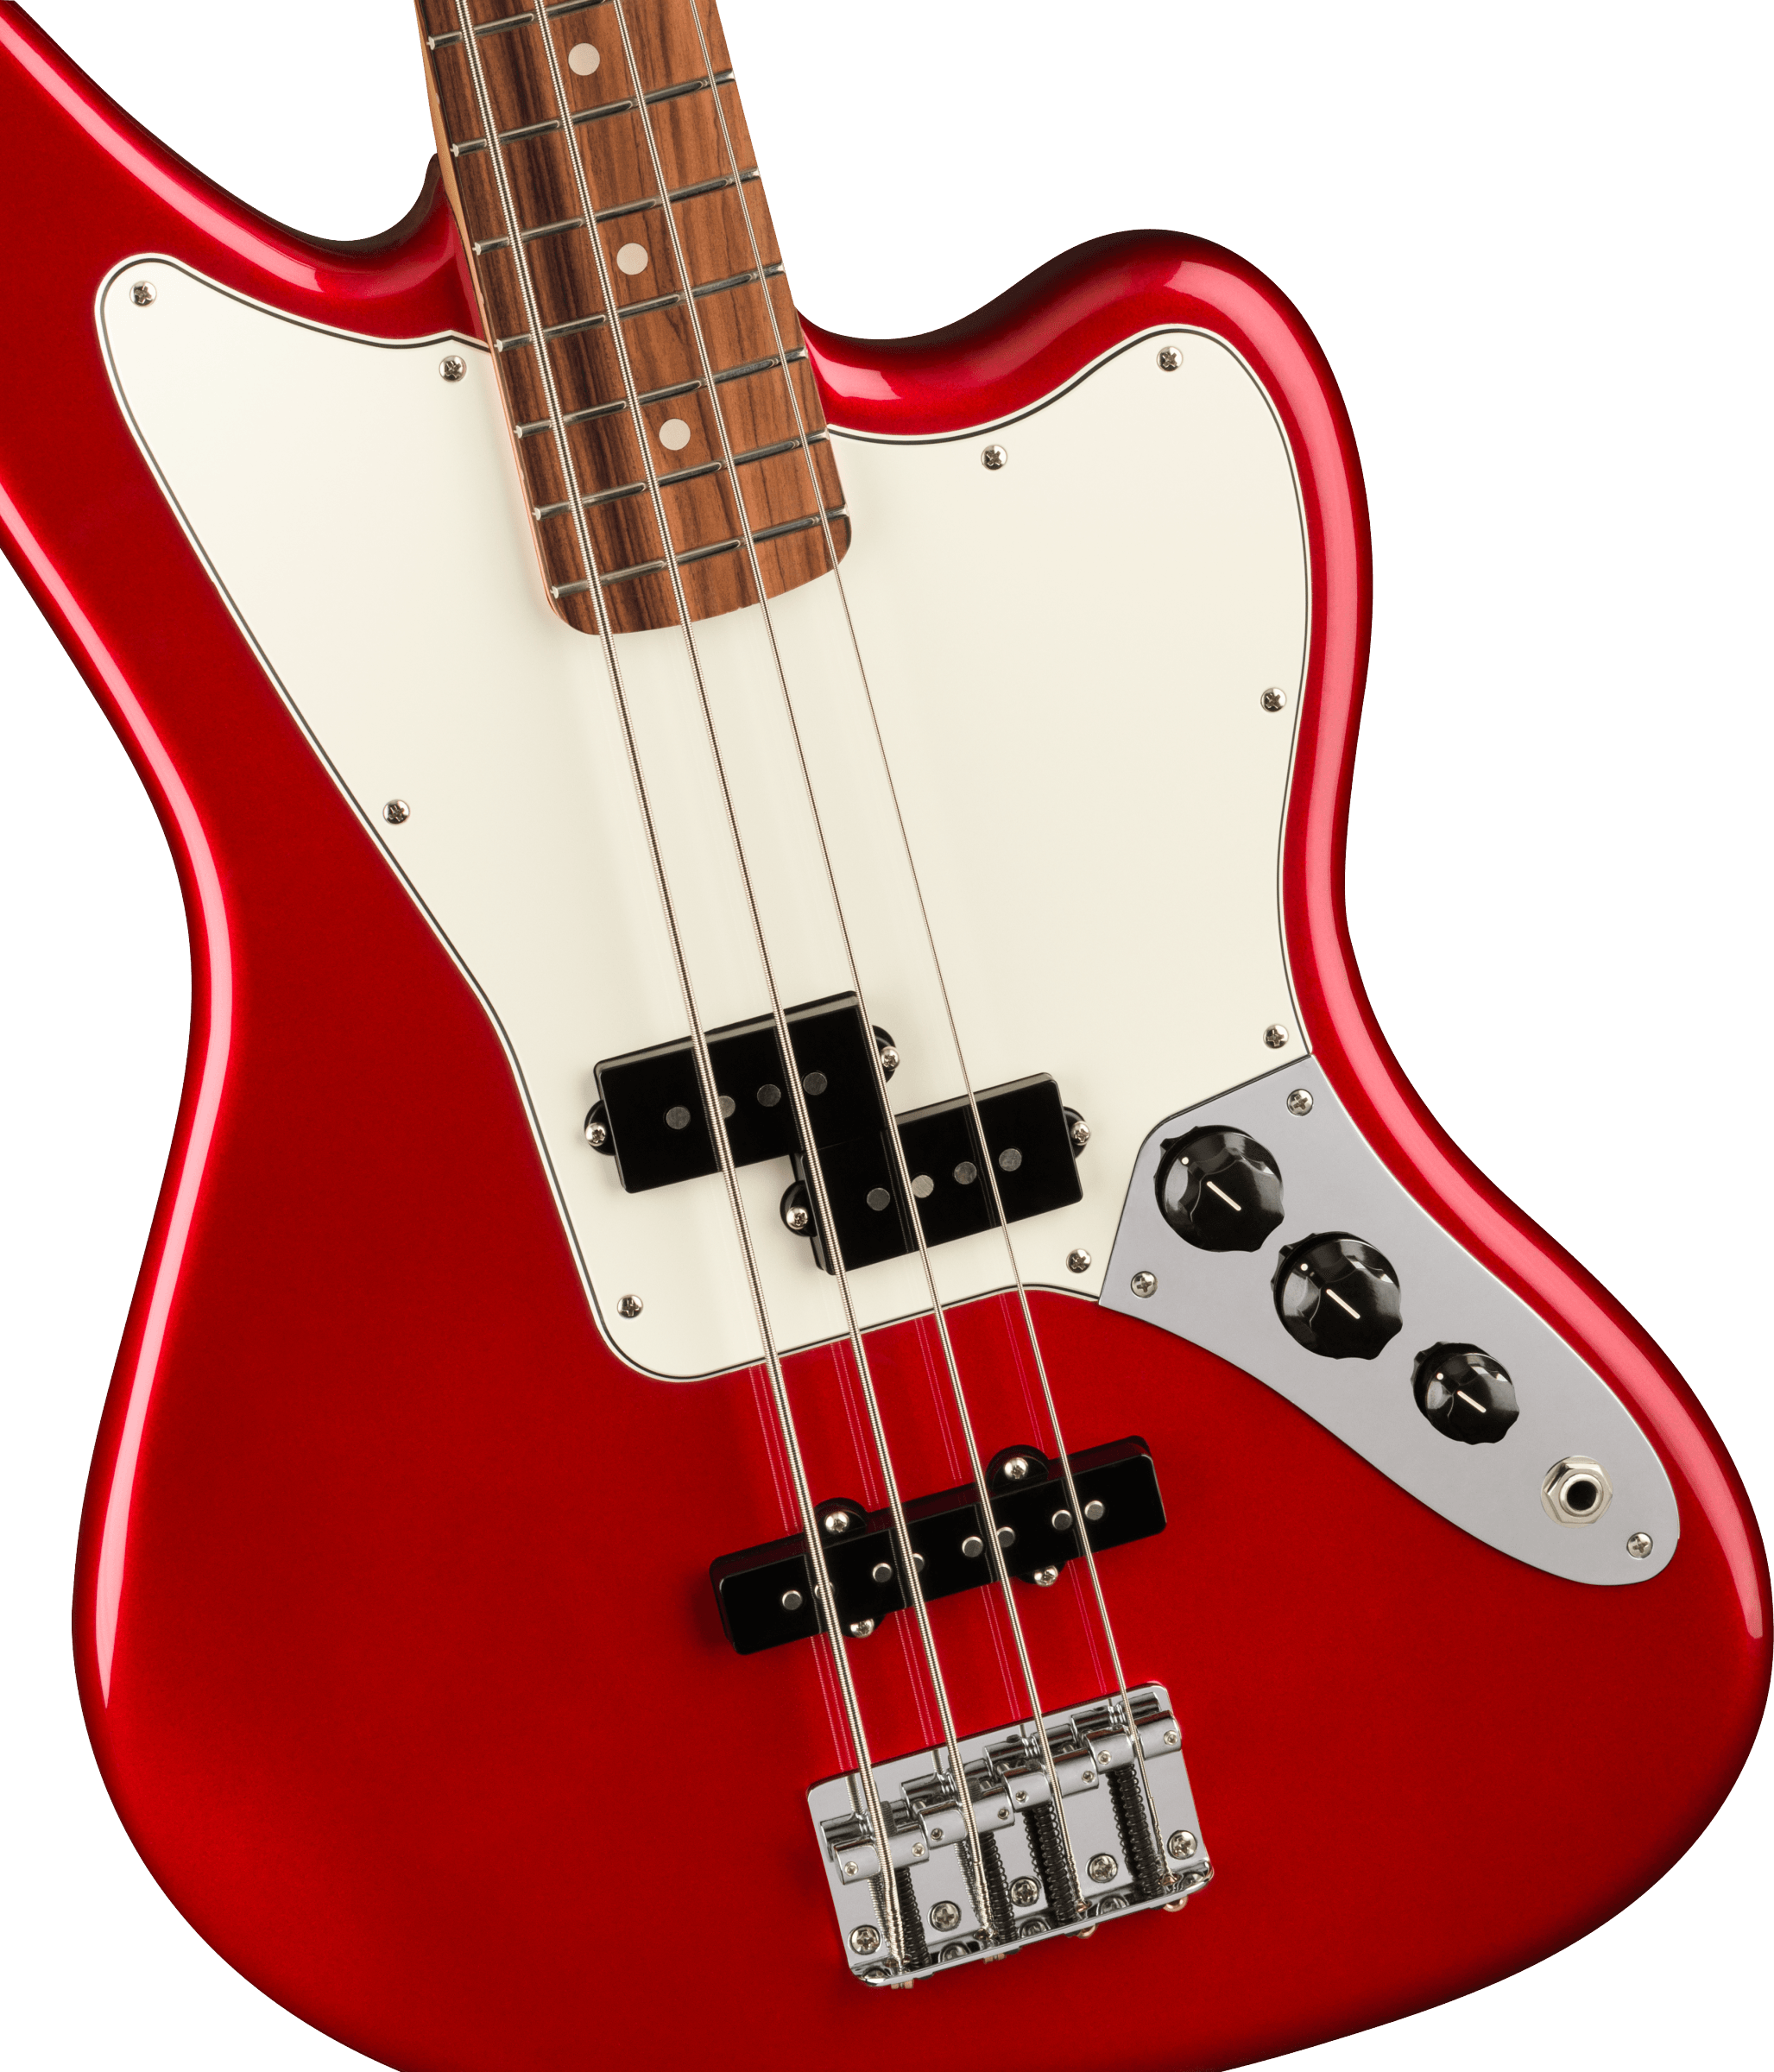 Fender Jaguar Bass Player - candy apple red Solid body electric